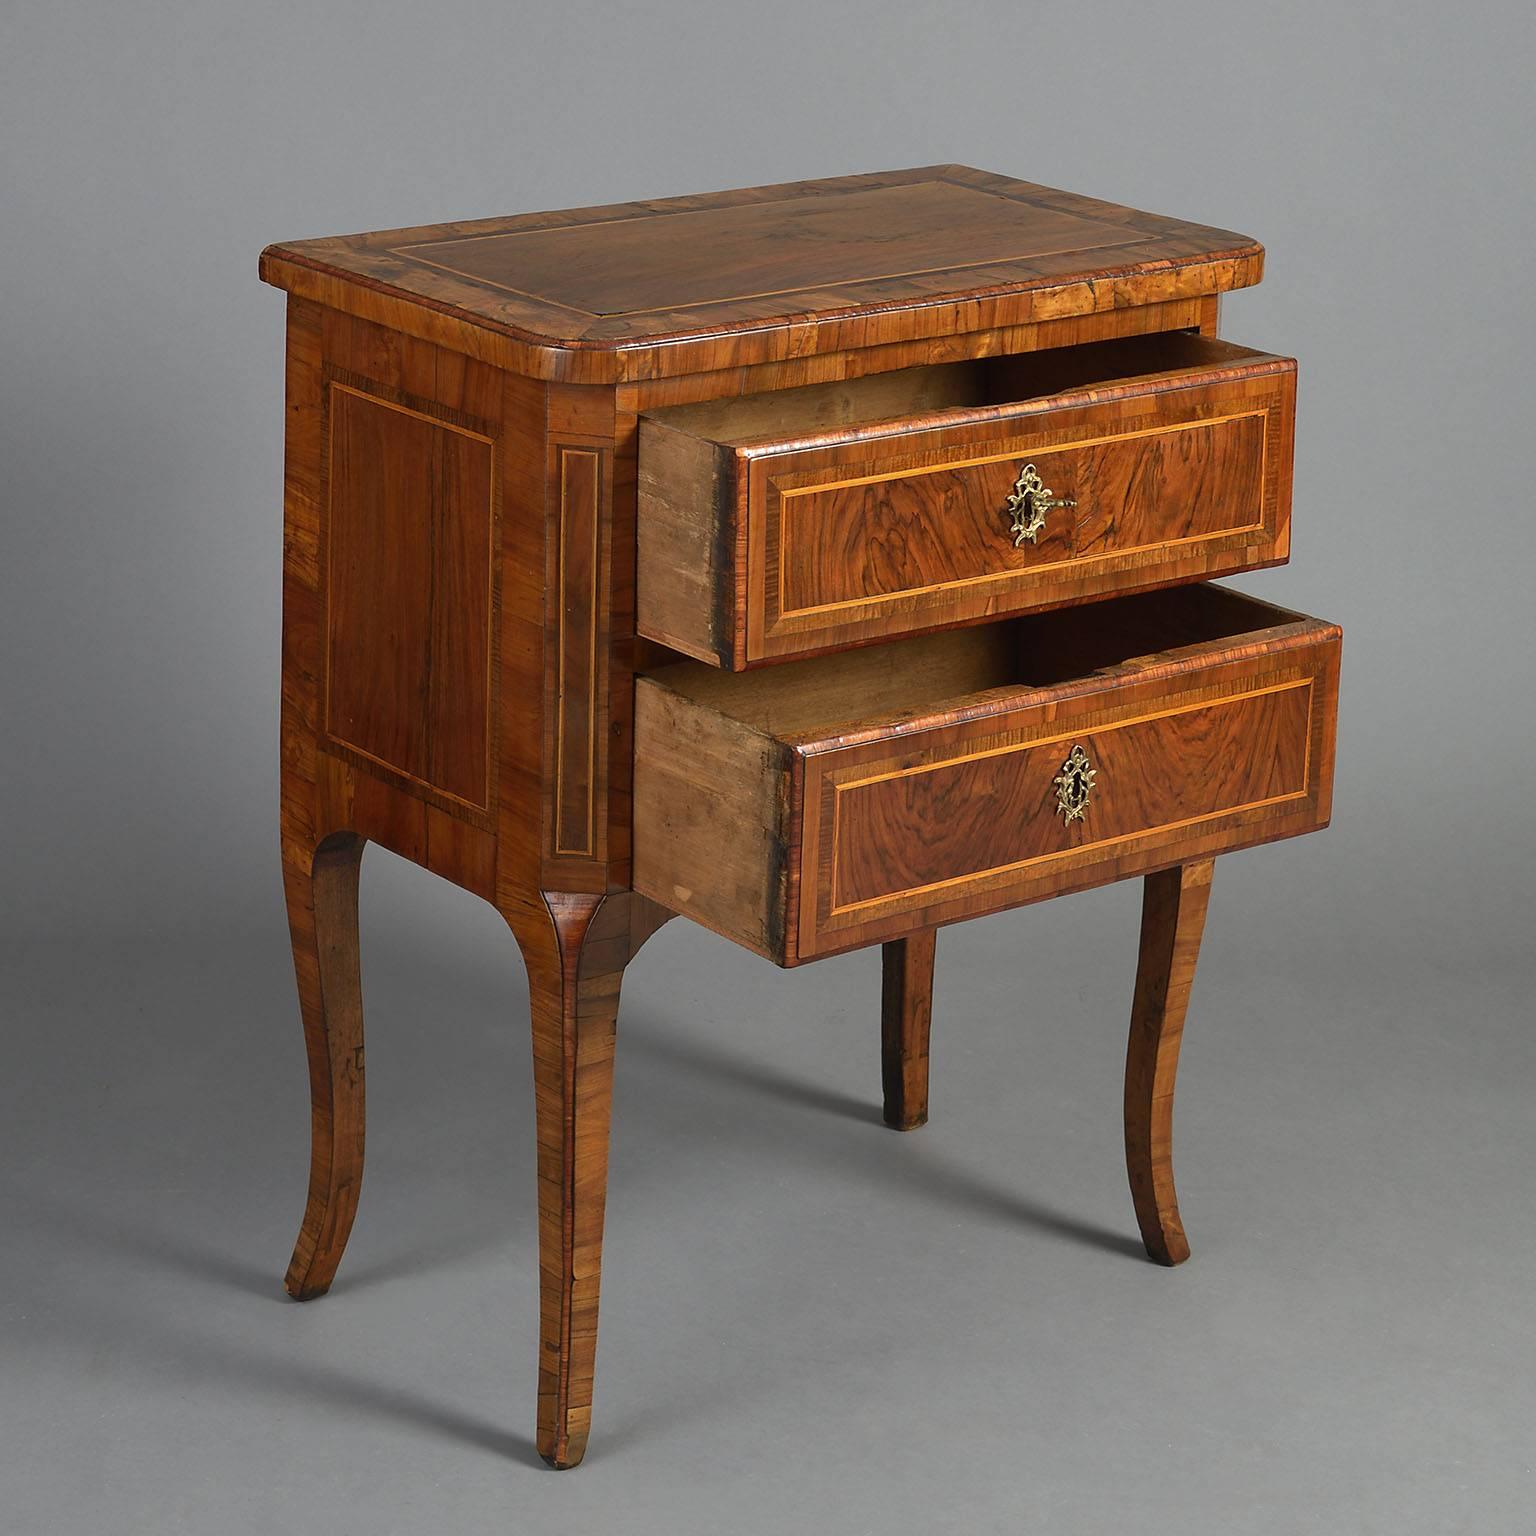 18th Century and Earlier 18th Century, Italian Walnut and Olivewood Small Commode